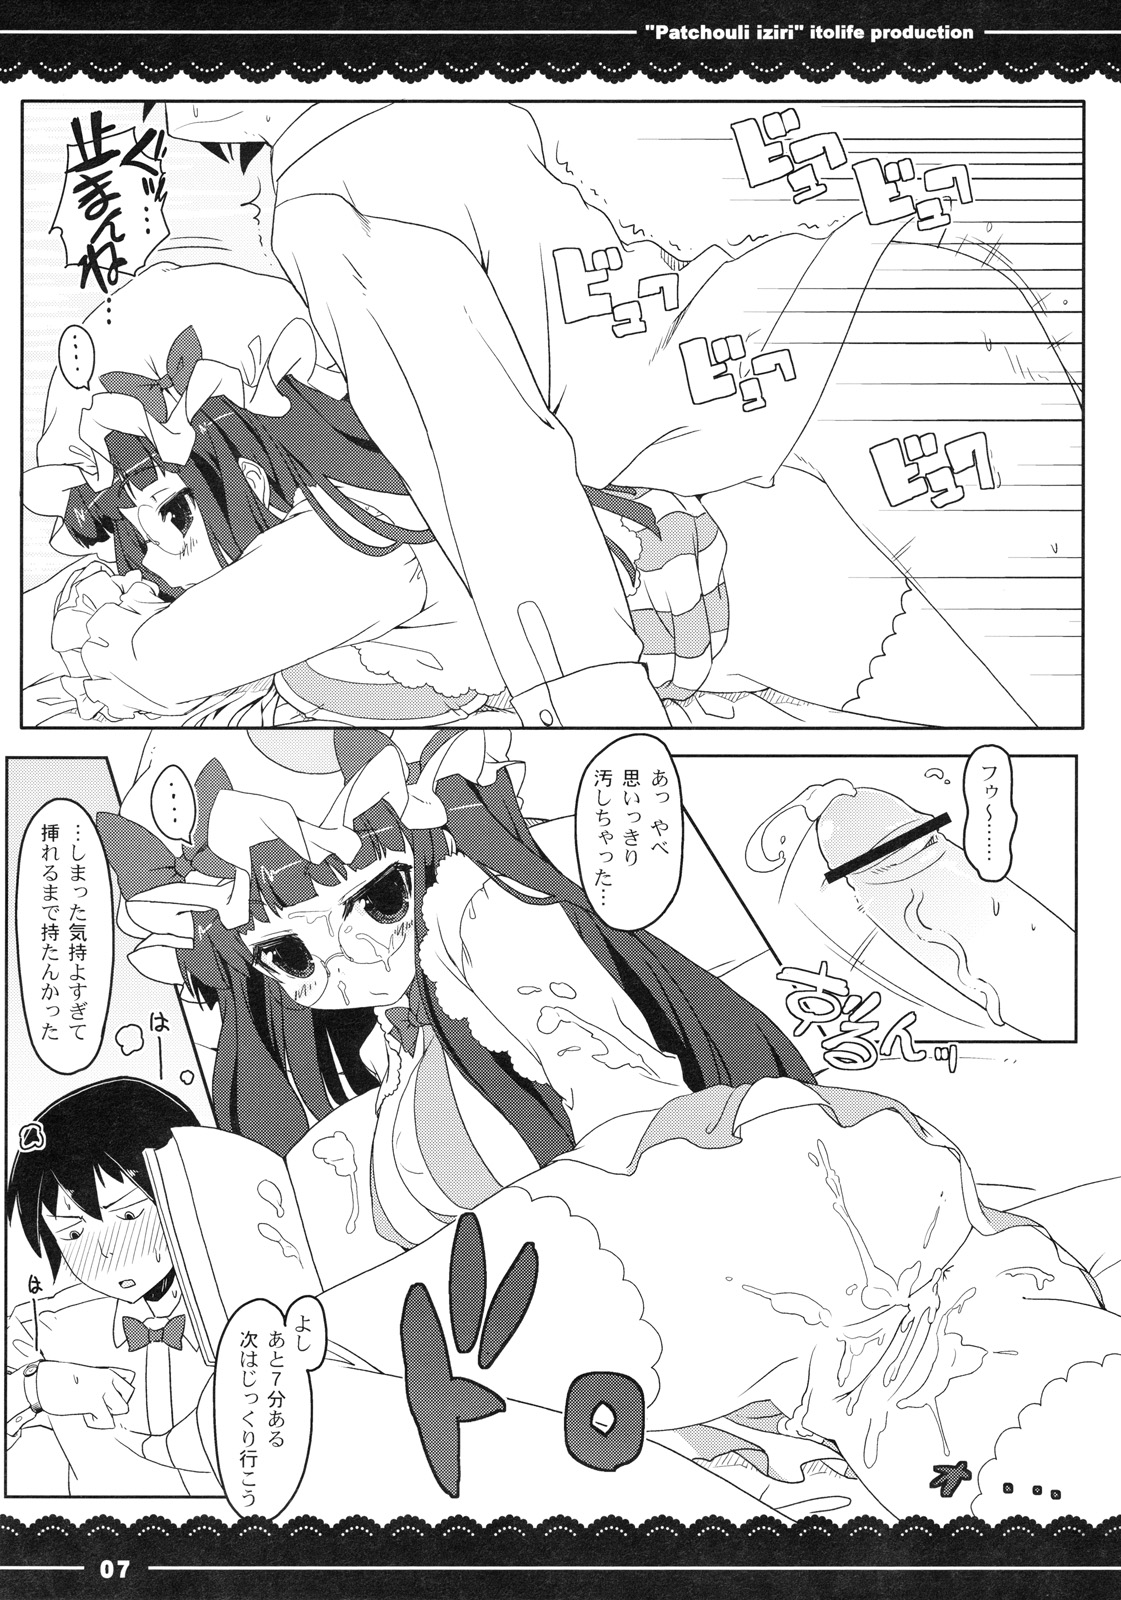 (C79) [Ito Life] Patchouli Ijiri (Touhou Project) (C79) (同人誌) [伊東ライフ] パチュリイジリ (東方)